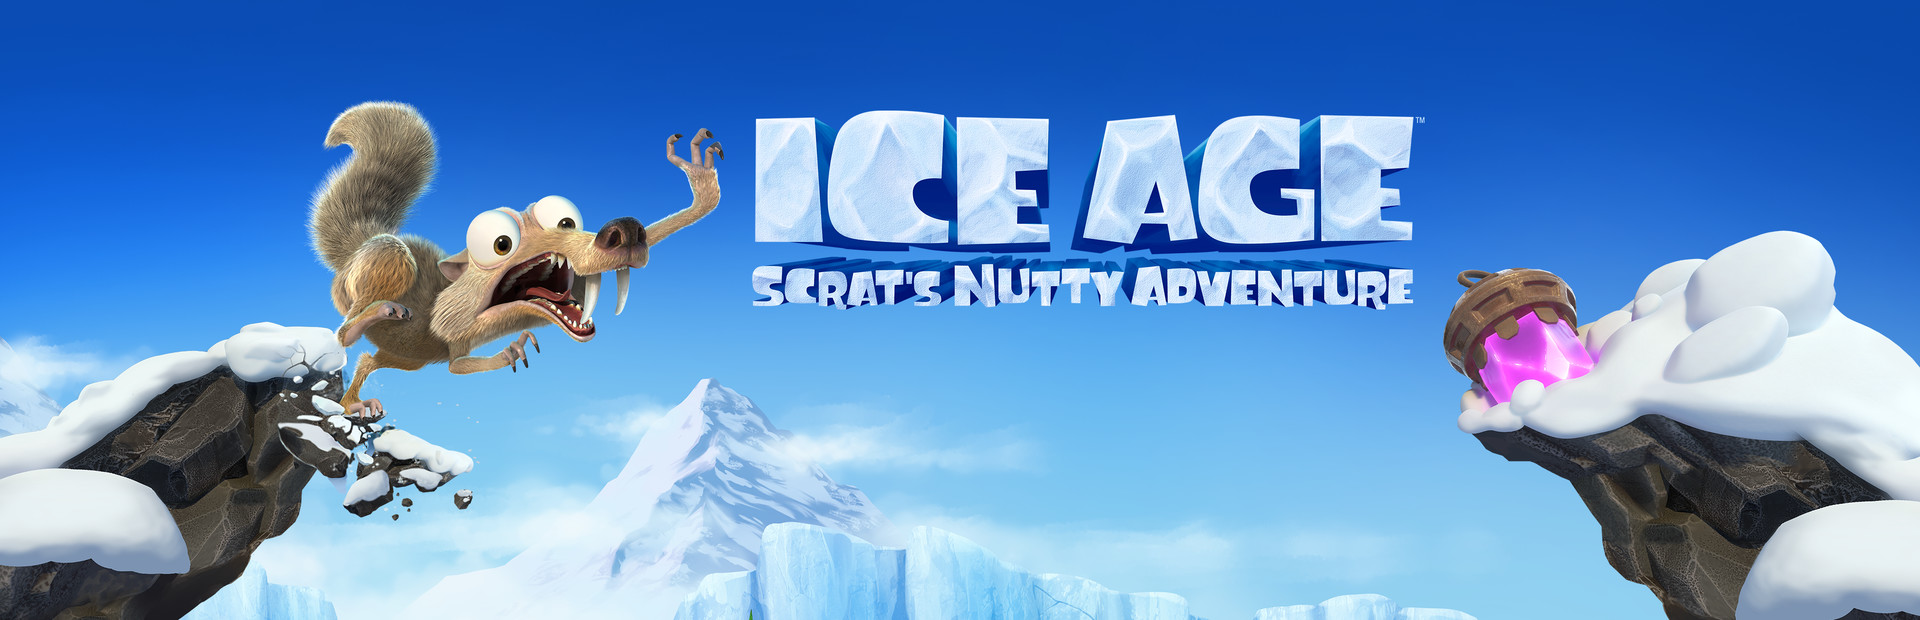 Ice Age Scrat's Nutty Adventure cover image